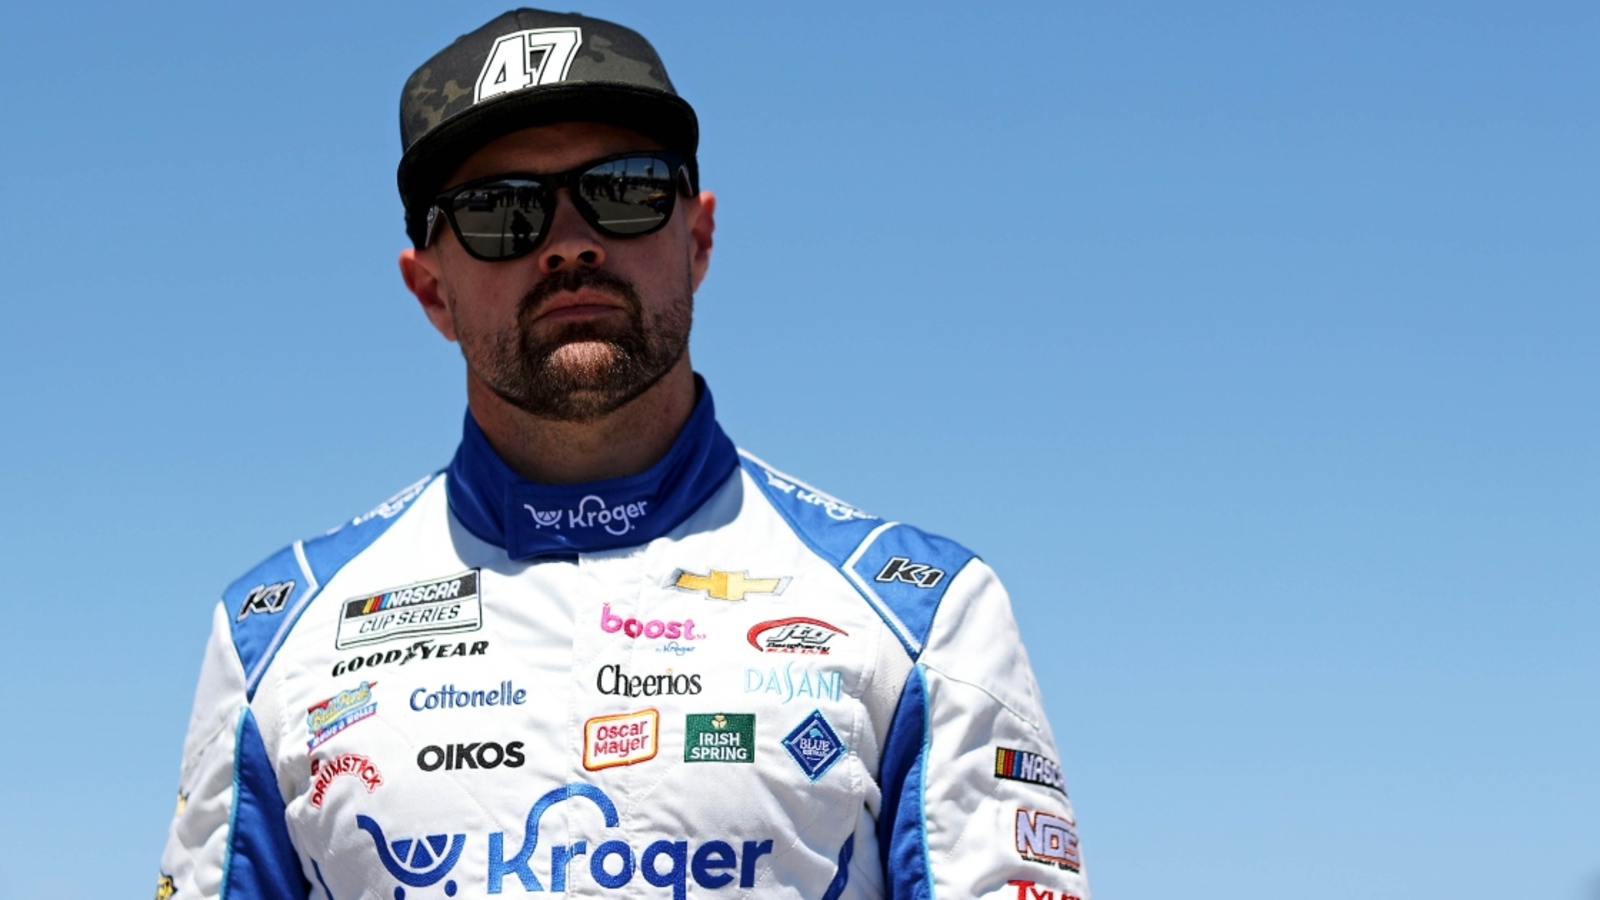 Ricky Stenhouse Jr. takes shot at Richard Childress after getting wrecked by Kyle Busch: ‘Maybe Richard will hold my watch’